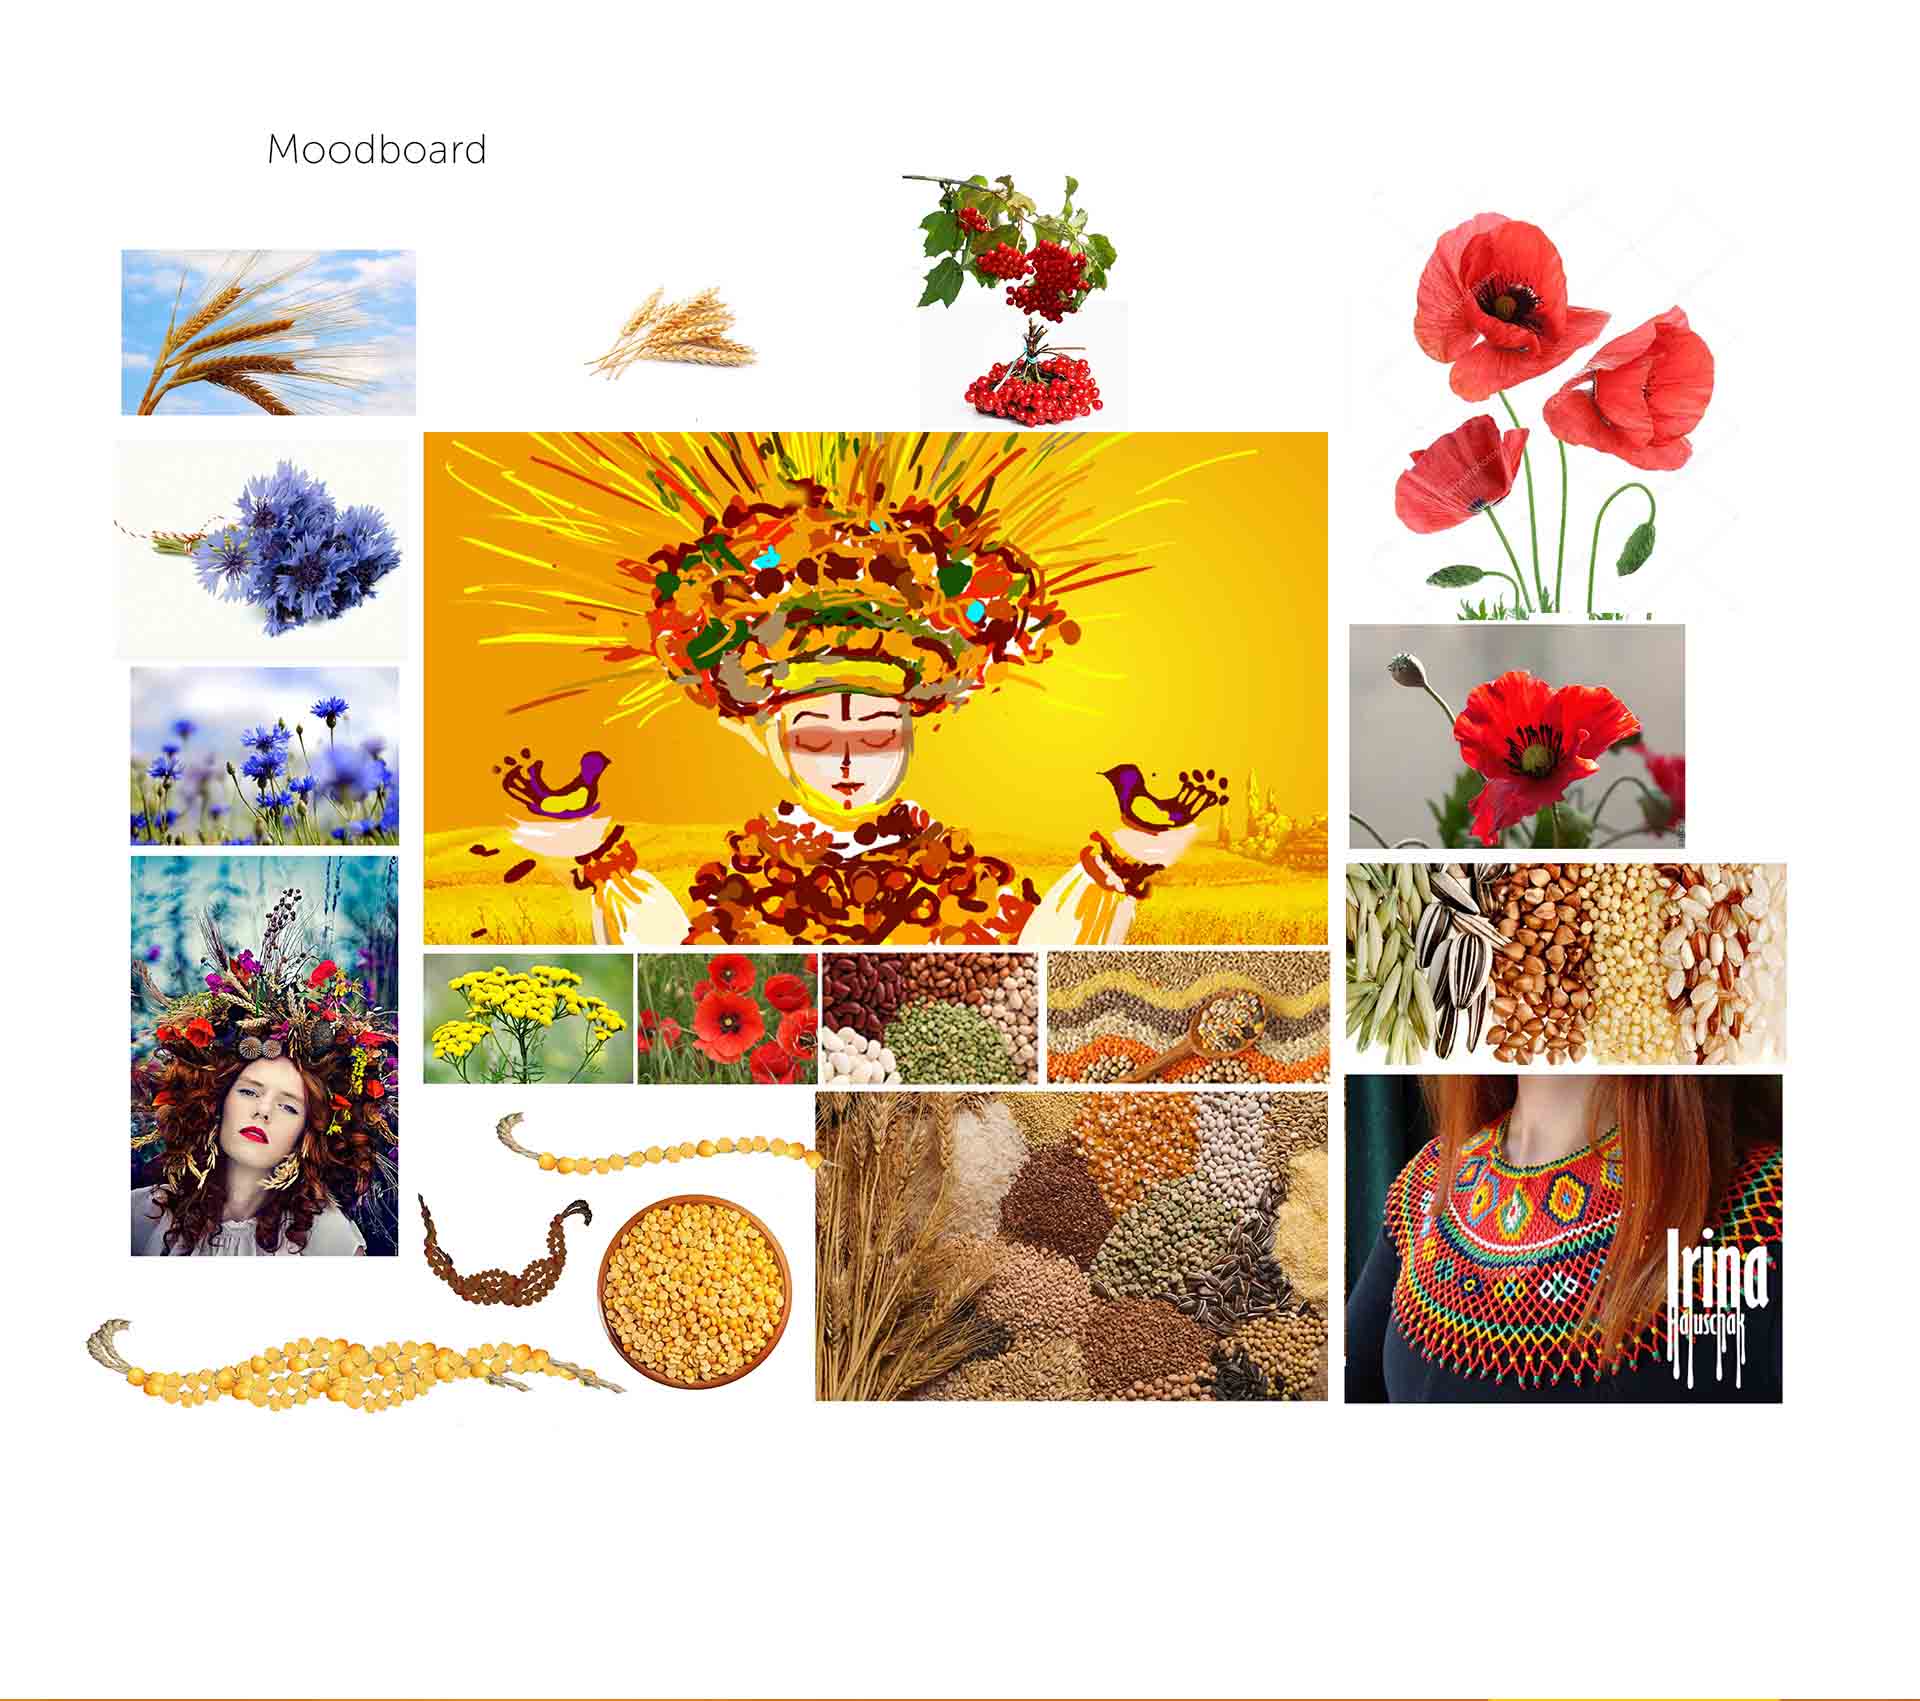 The moodboard contains an authentic image of Mother Goddes and craft design